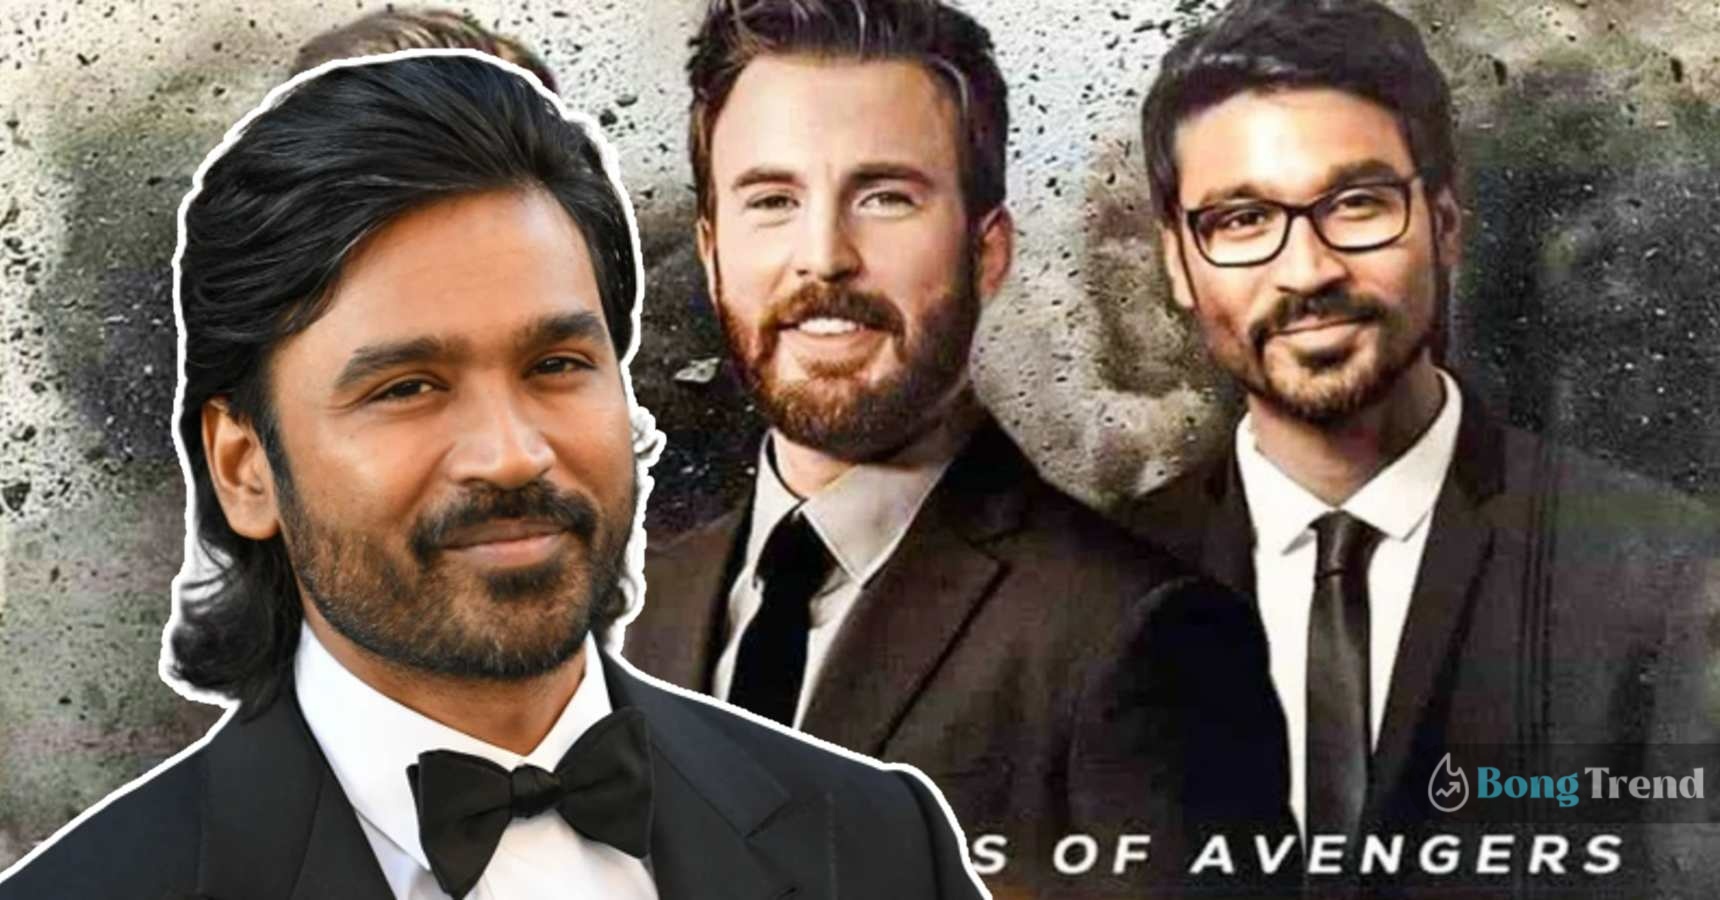 Dhanush in The Gray Man movie with budget of 1600 Cr